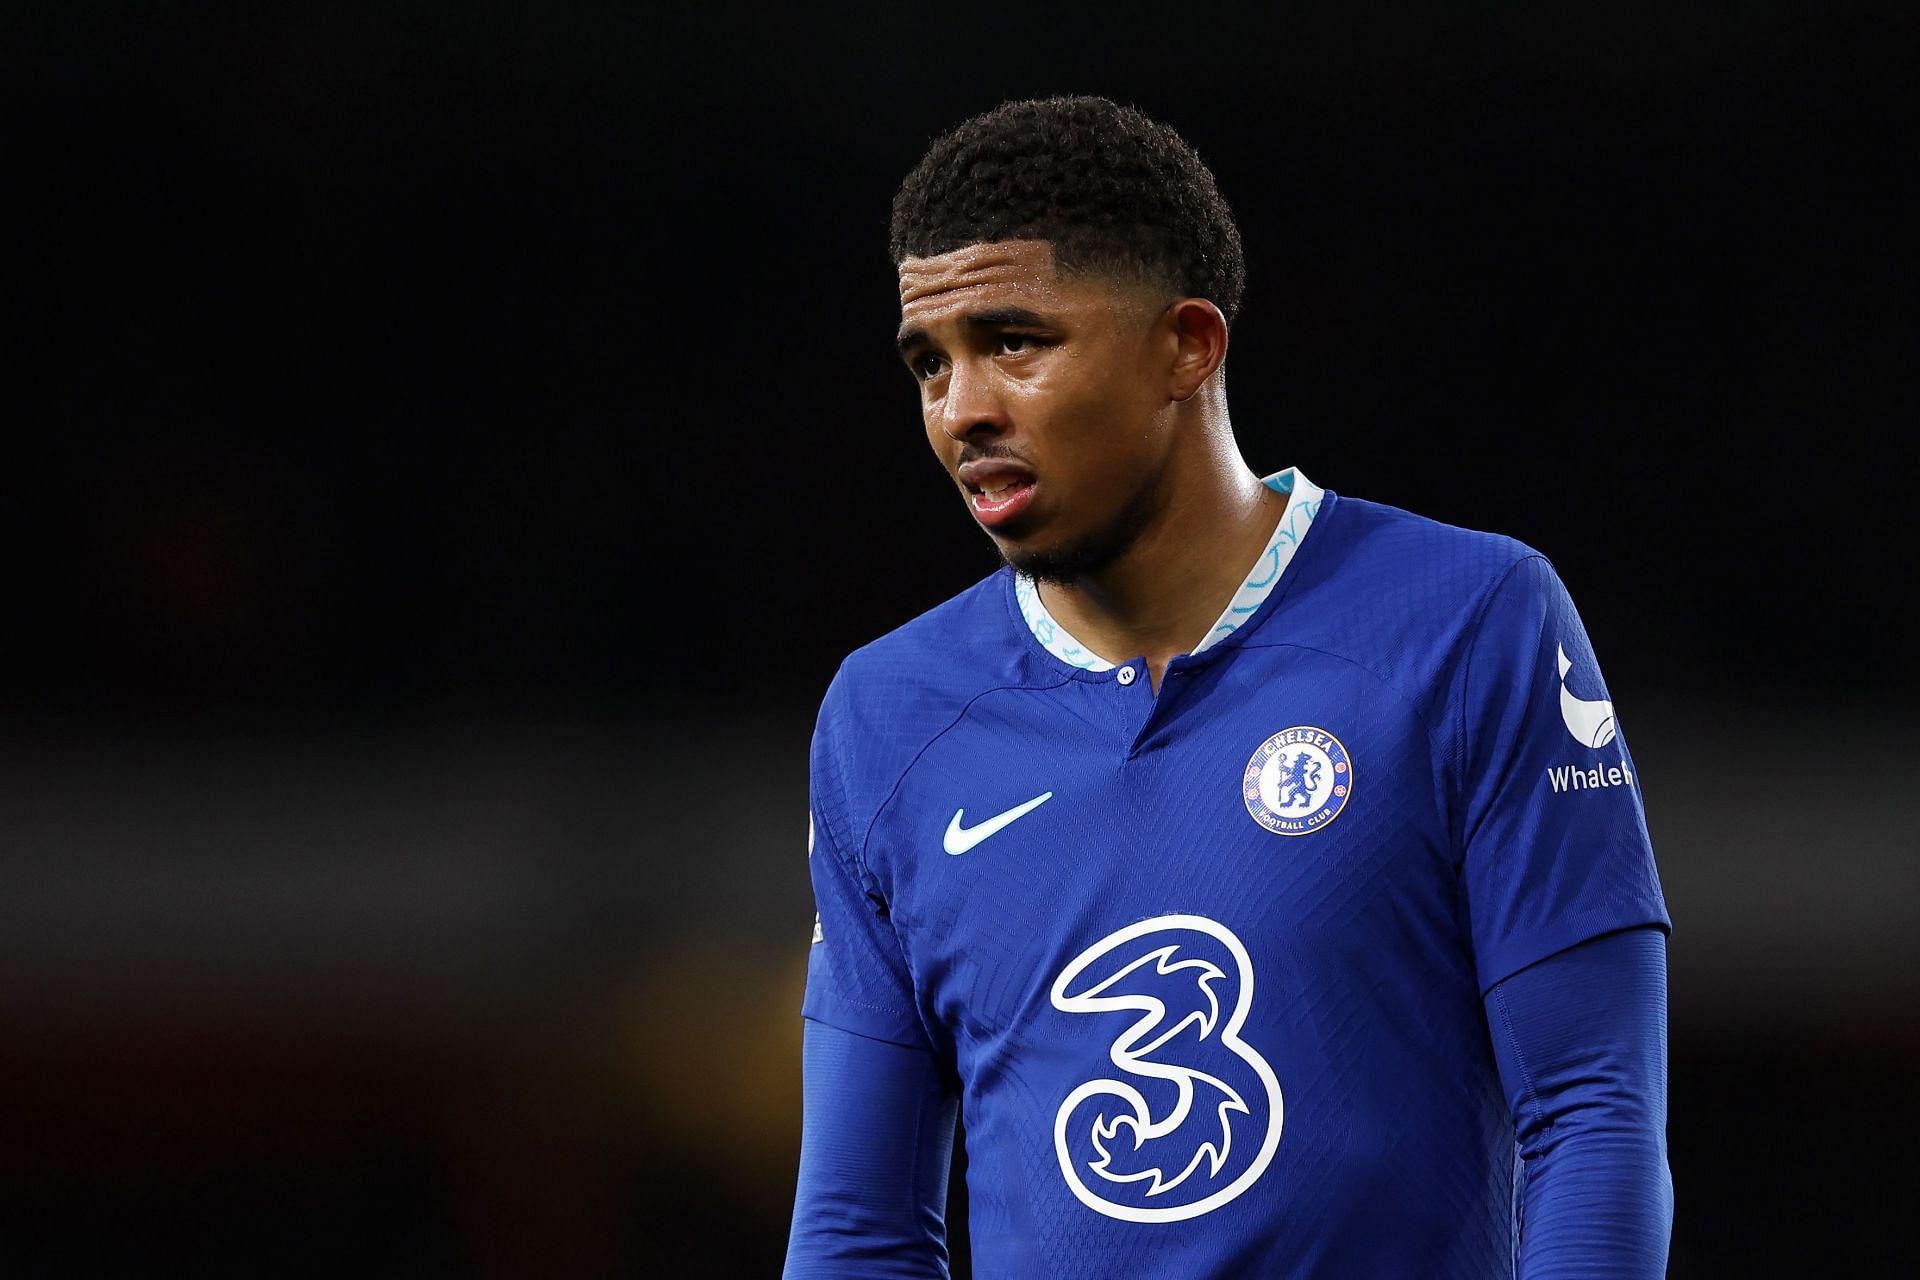 Wesley Fofana has struggled with injuries since joining Chelsea